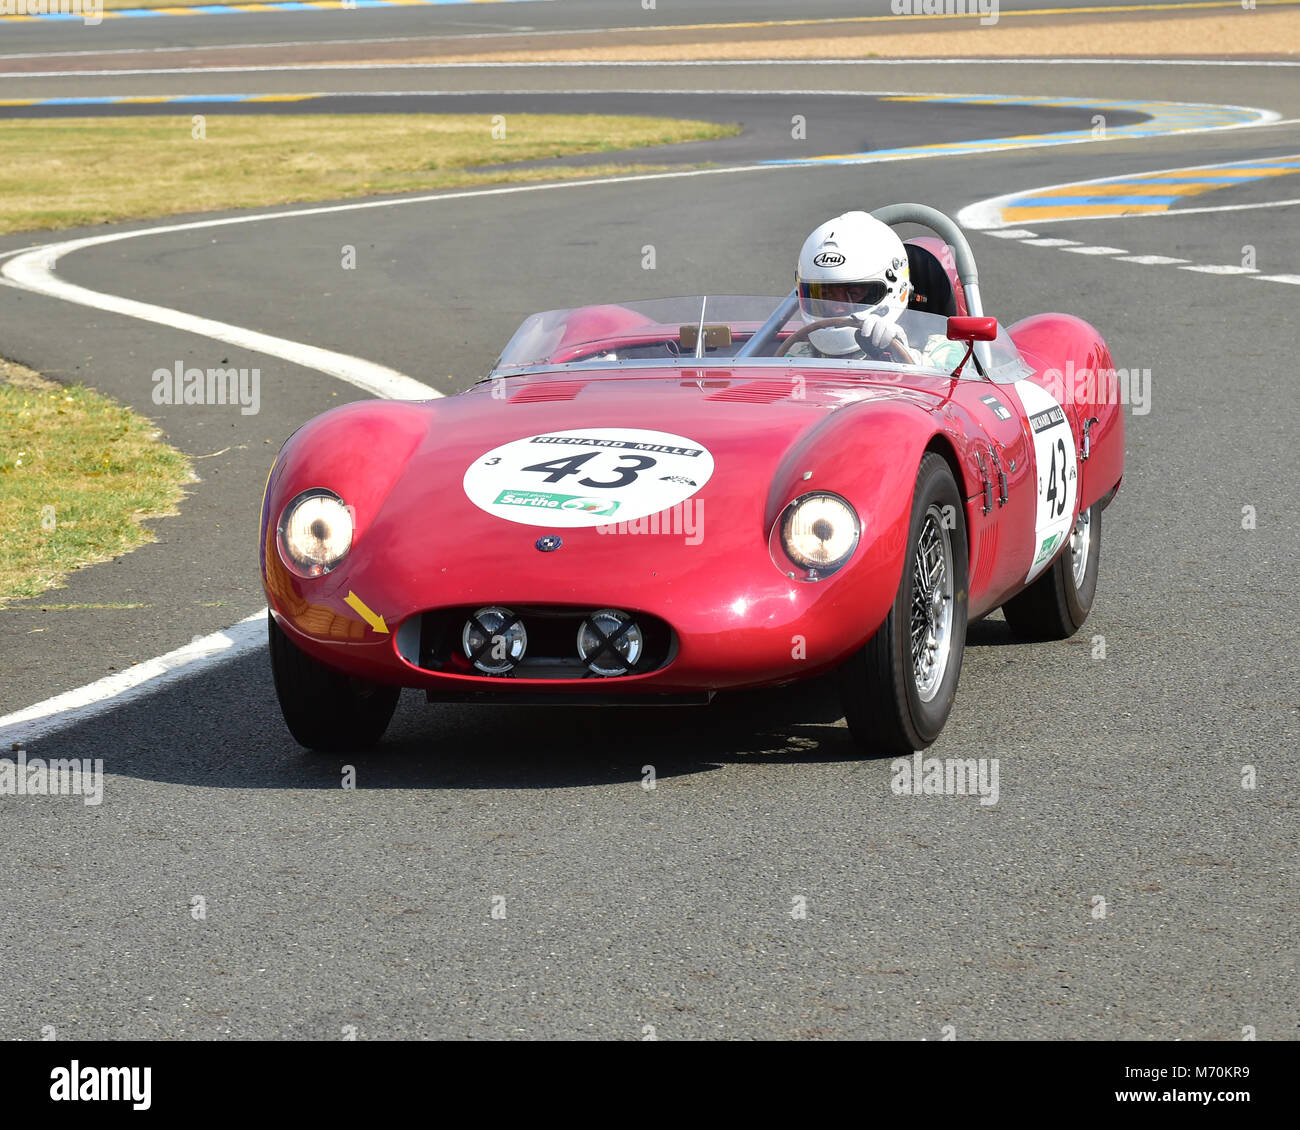 Gabriele Spangenberg, Stephan Konig, Osca 2000 Spider, Le Mans Classic 2014, 2014, circuit racing, Classic, classic cars, Classic Racing Cars, France, Stock Photo